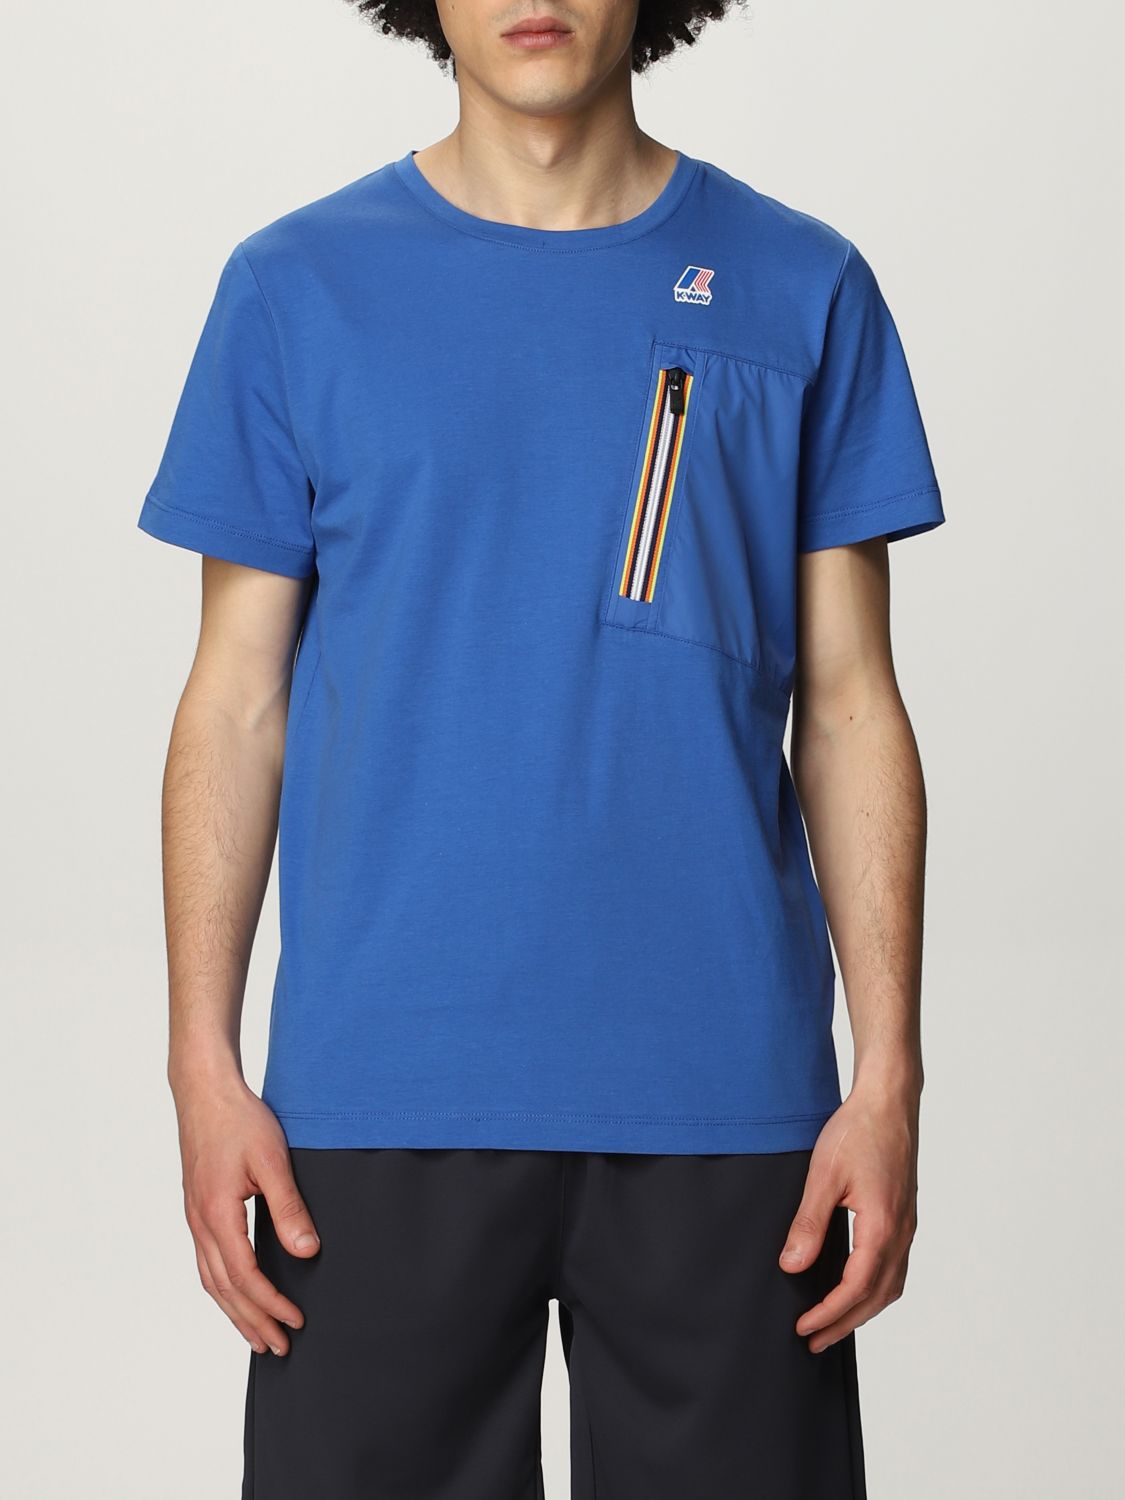 K-WAY: Le vrai isaie T-shirt with zip - Royal Blue | K-Way t-shirt ...